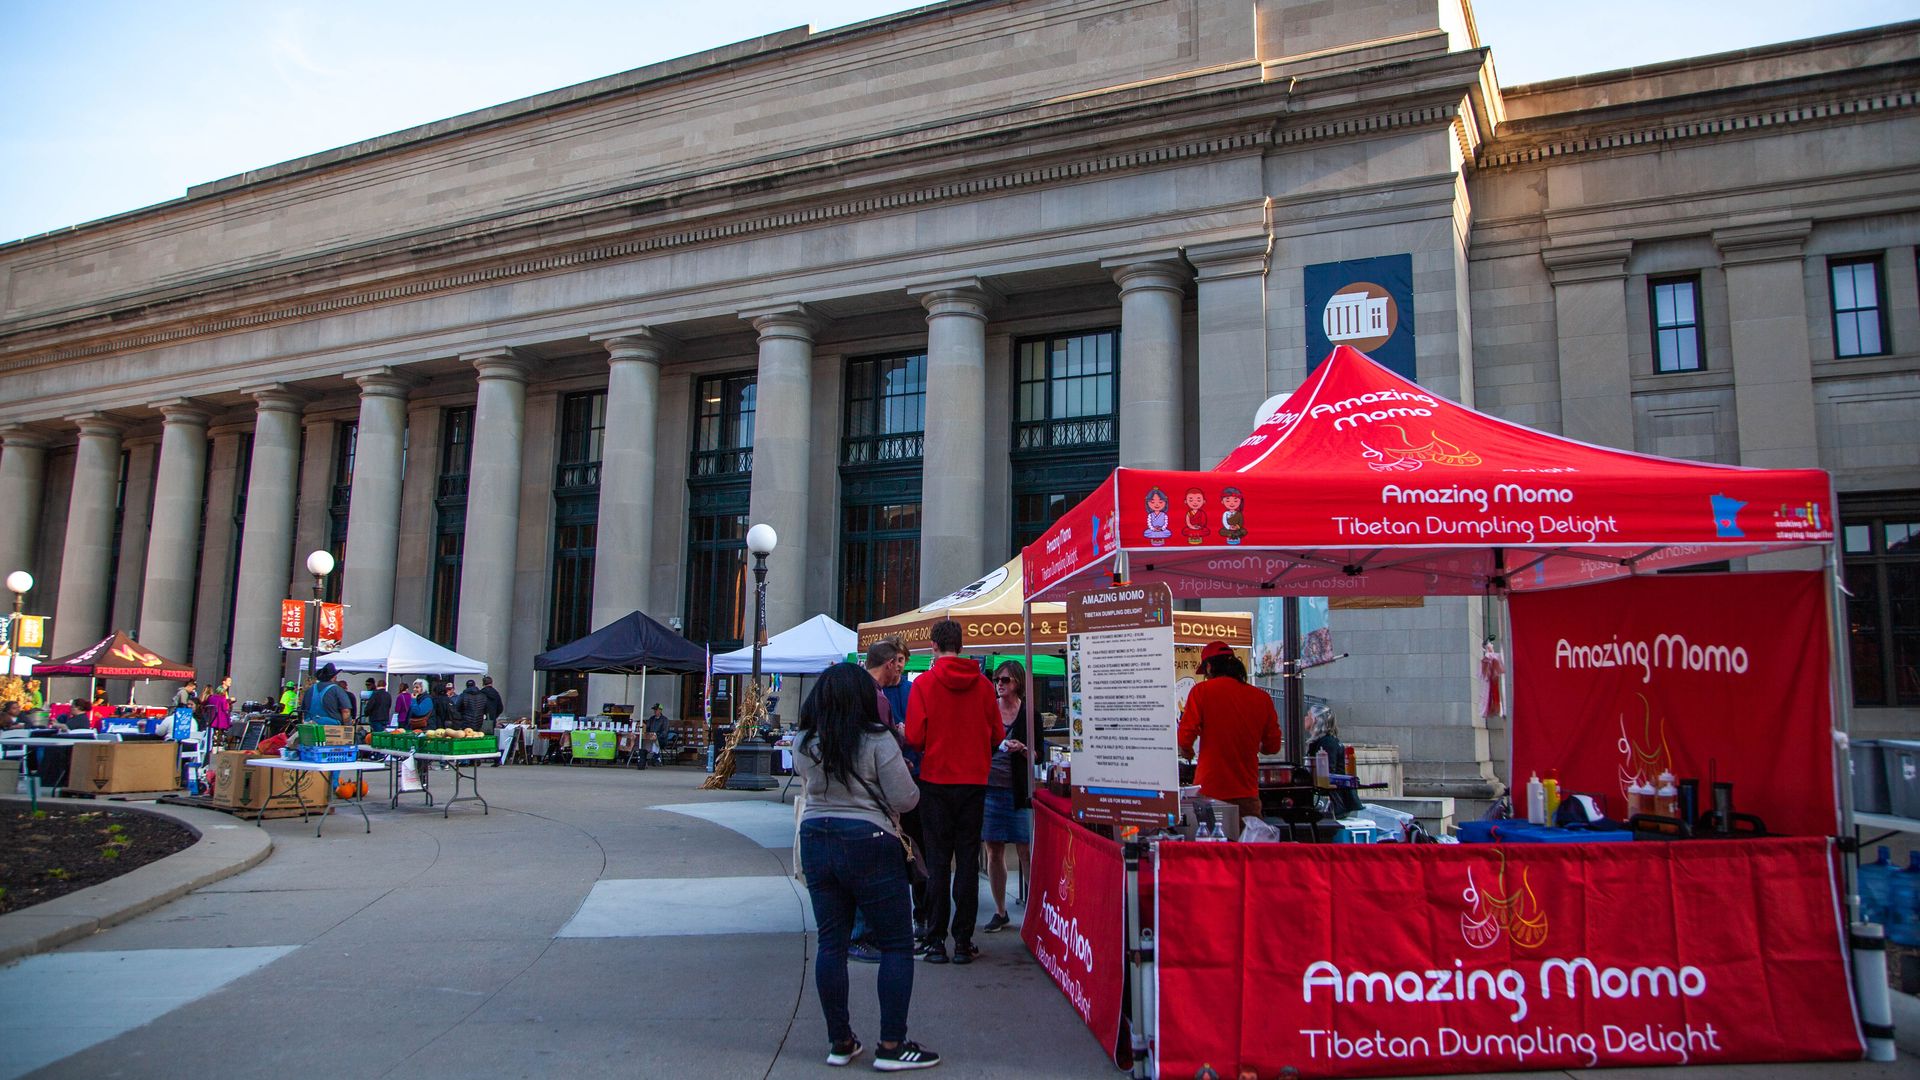 farmer's market vendor stands, including a red tent selling dumplings, in front of st. paul's union station